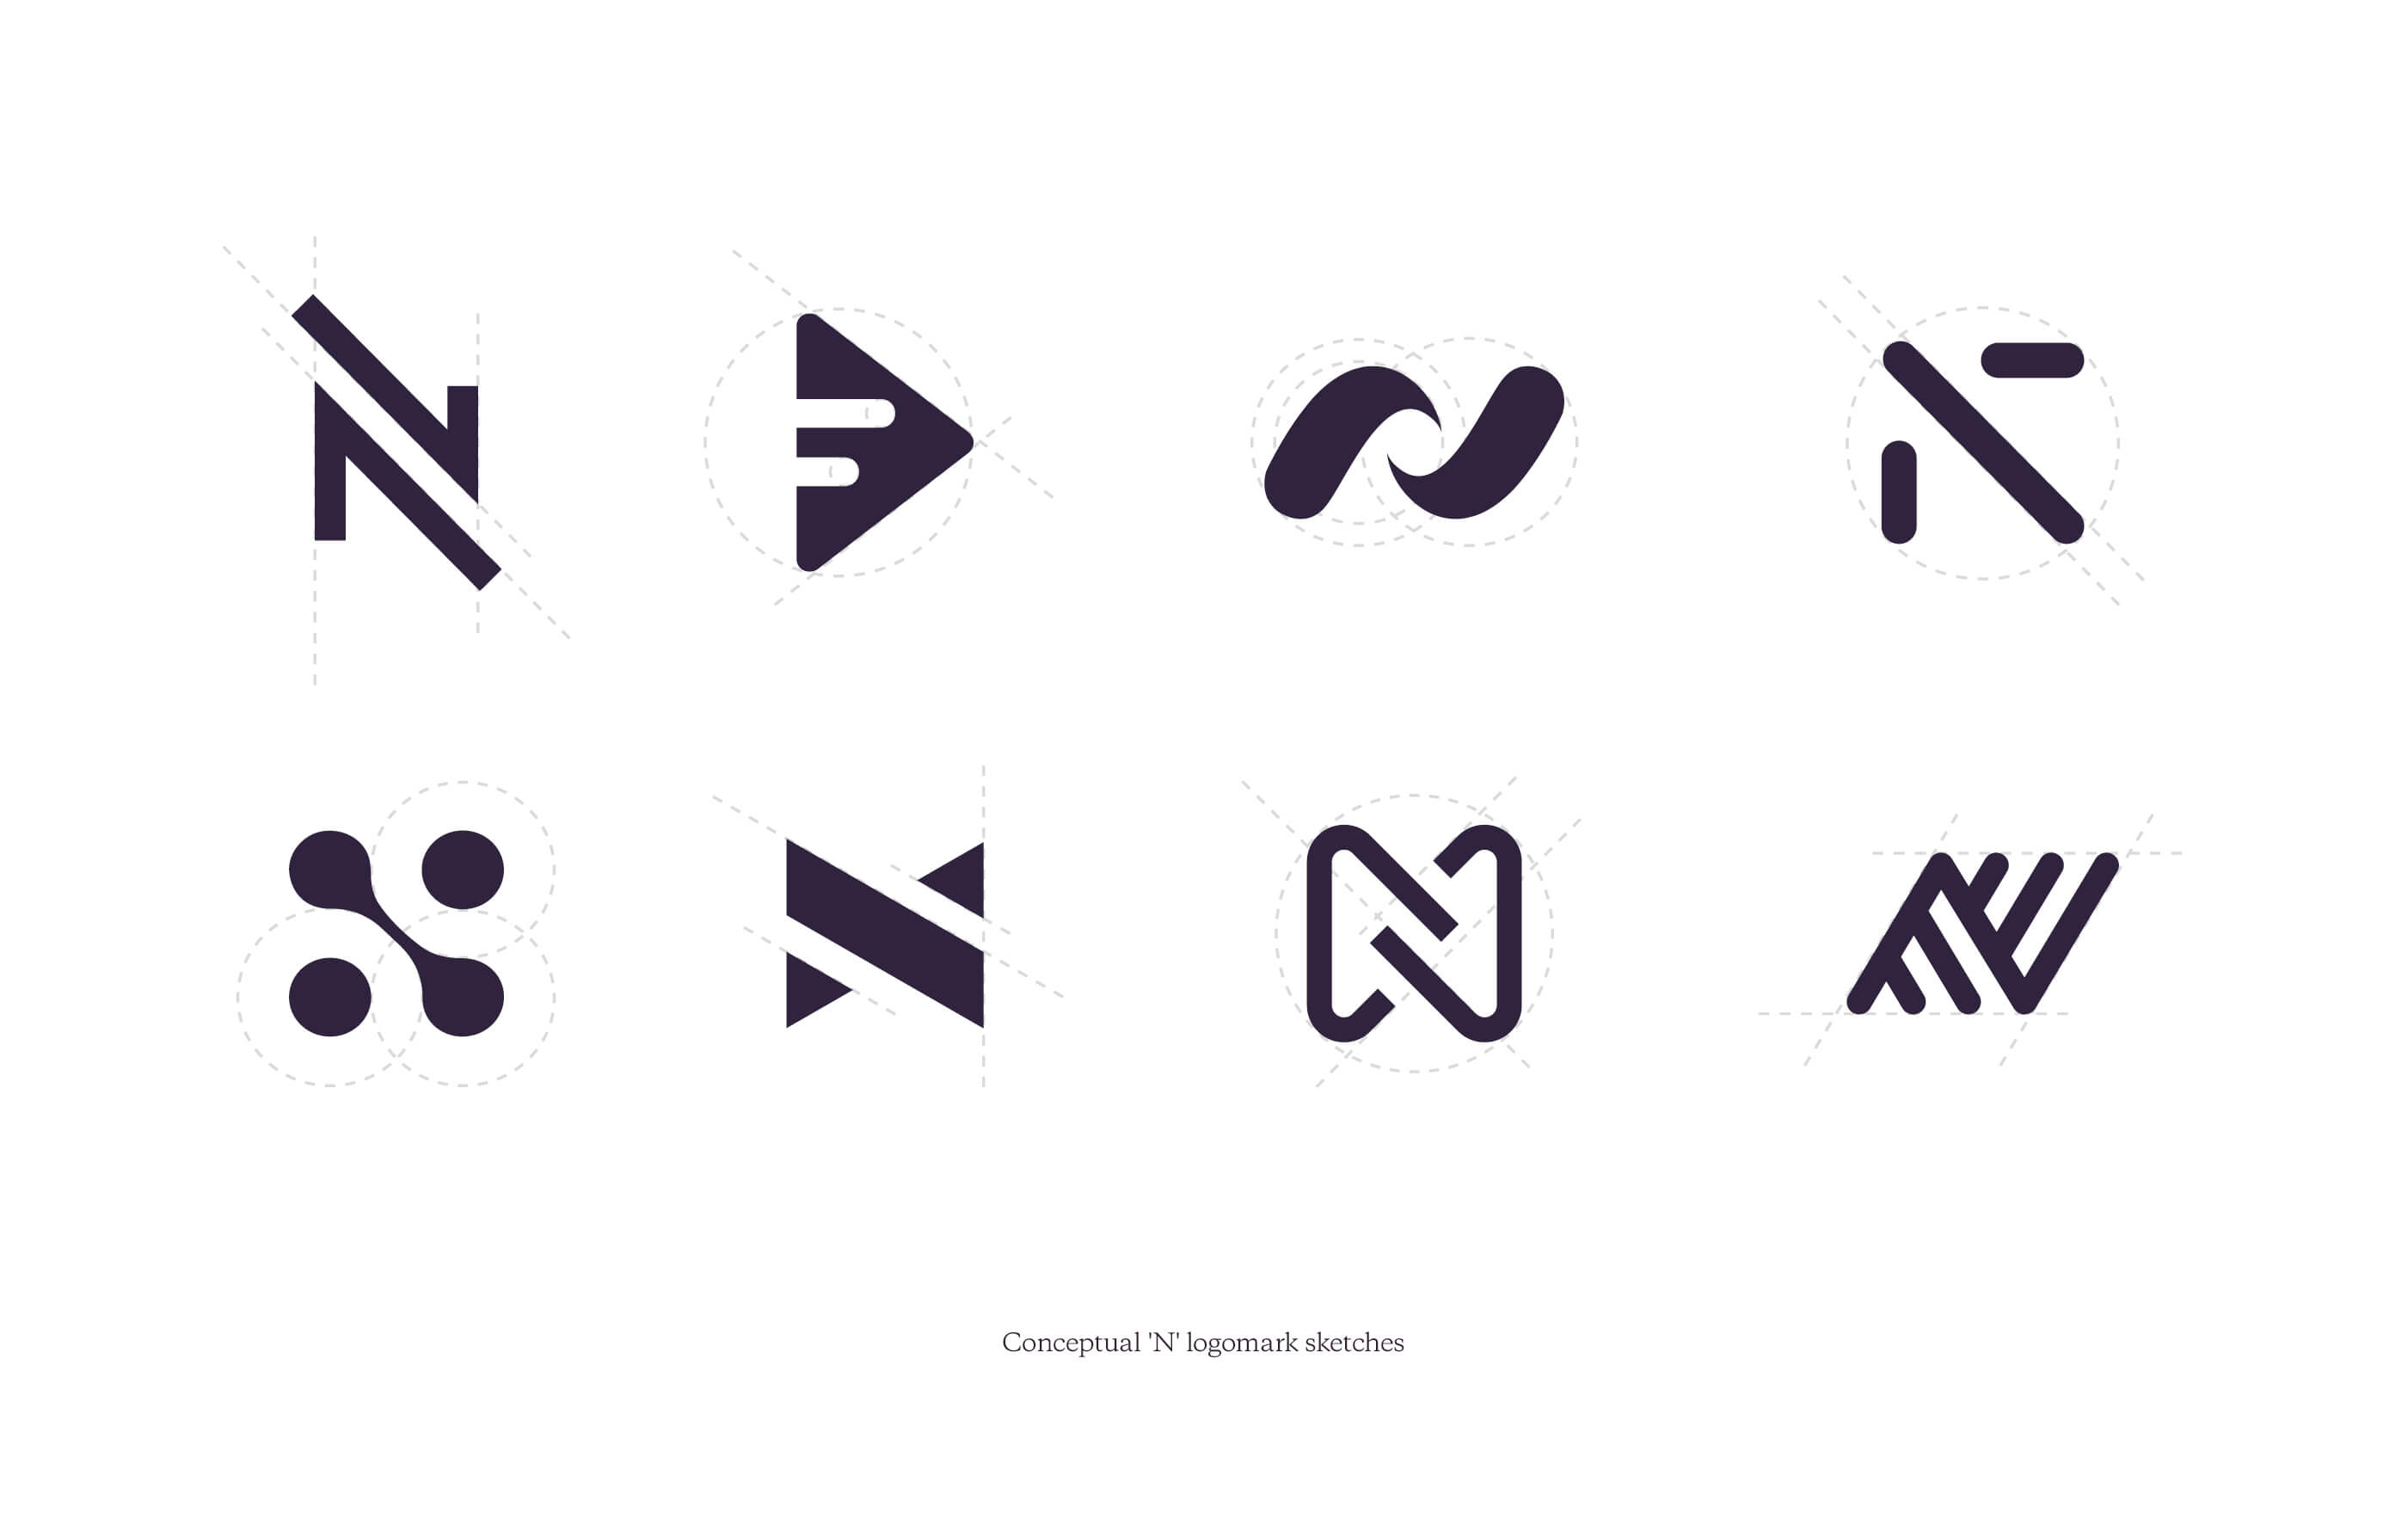 Conceptual 'N' logomark sketches, in purple on a white background